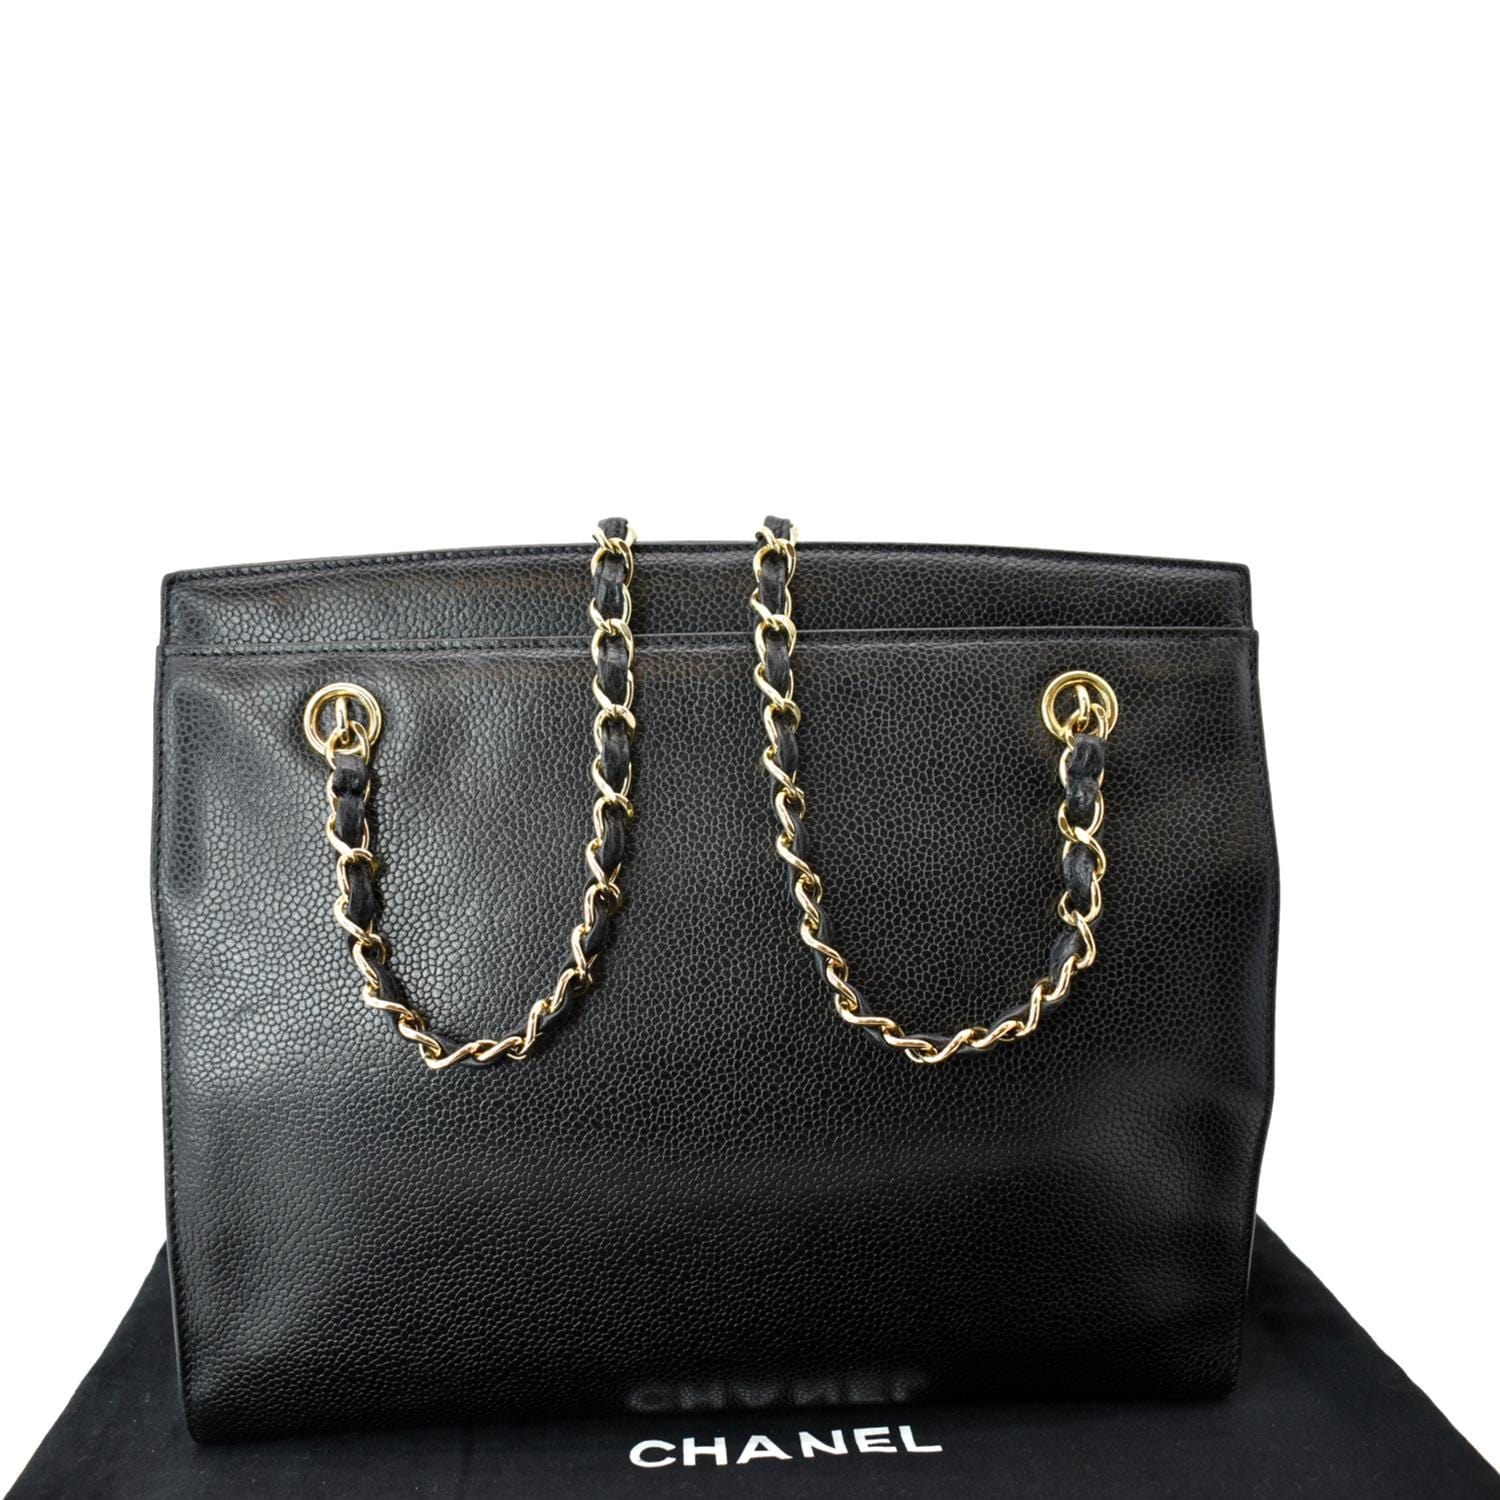 CH☆NEL Caviar Leather CC Wallet On Chain Bags From BEST CC FACTORY! 🎀  Jeniffer Marie : r/PoshmarkLuxuryReps